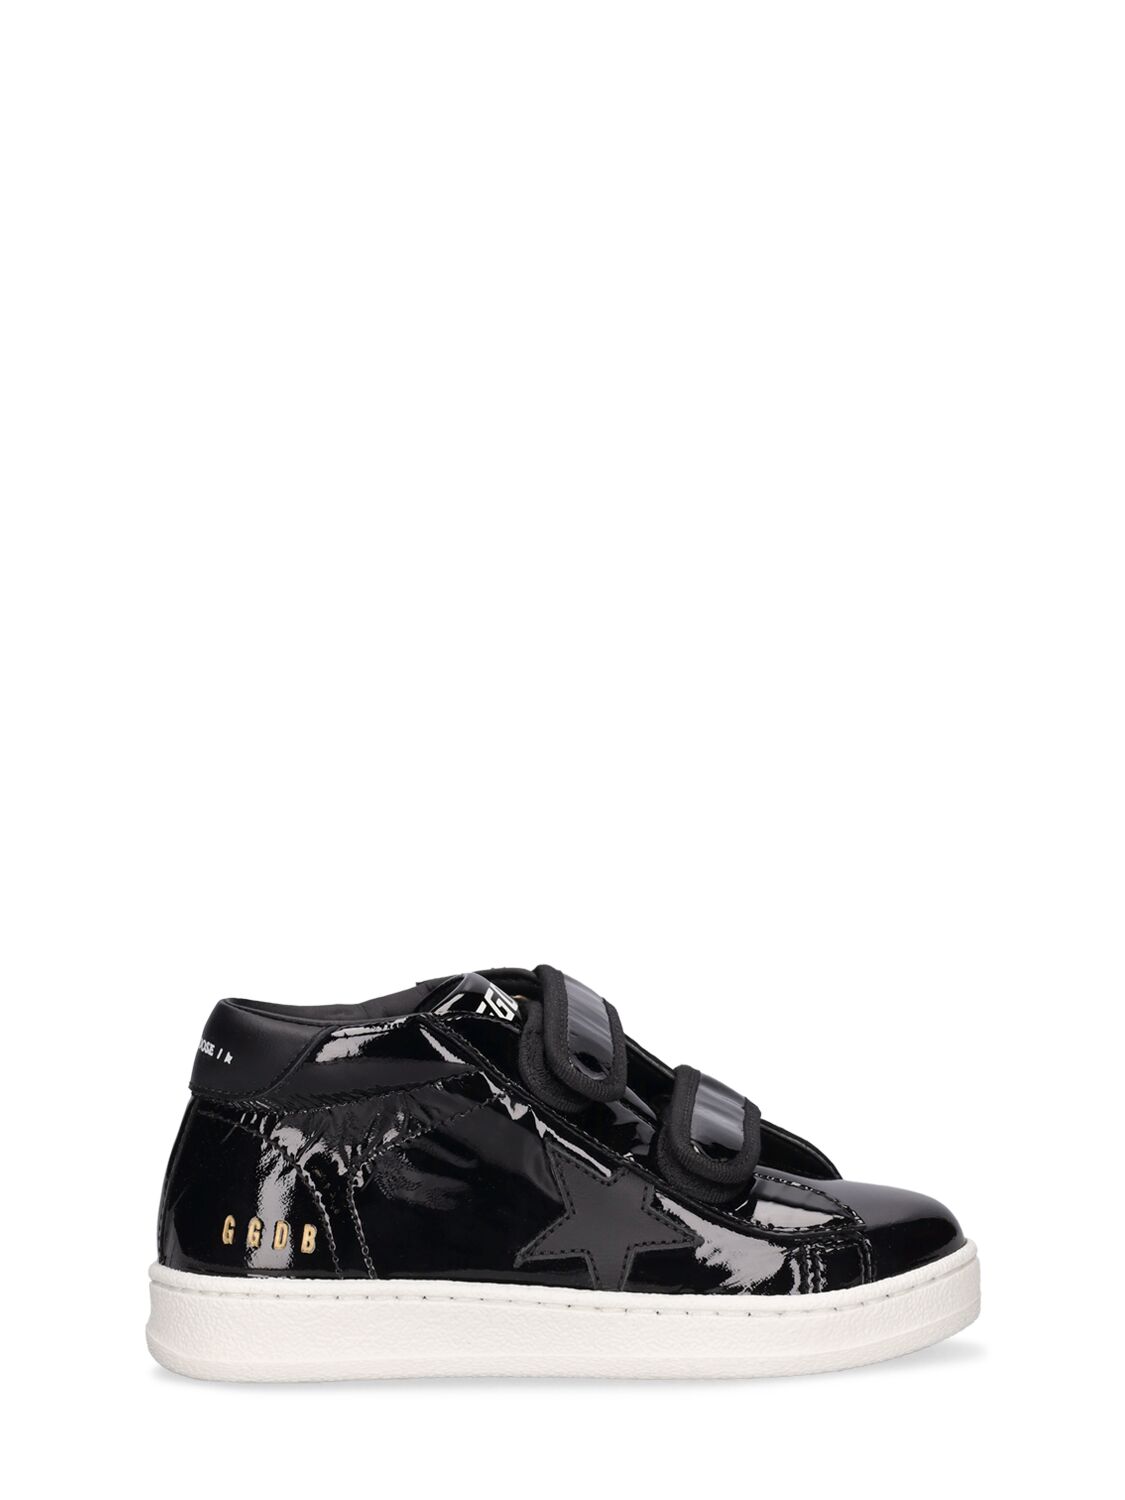 June Patent Leather Strap Sneakers